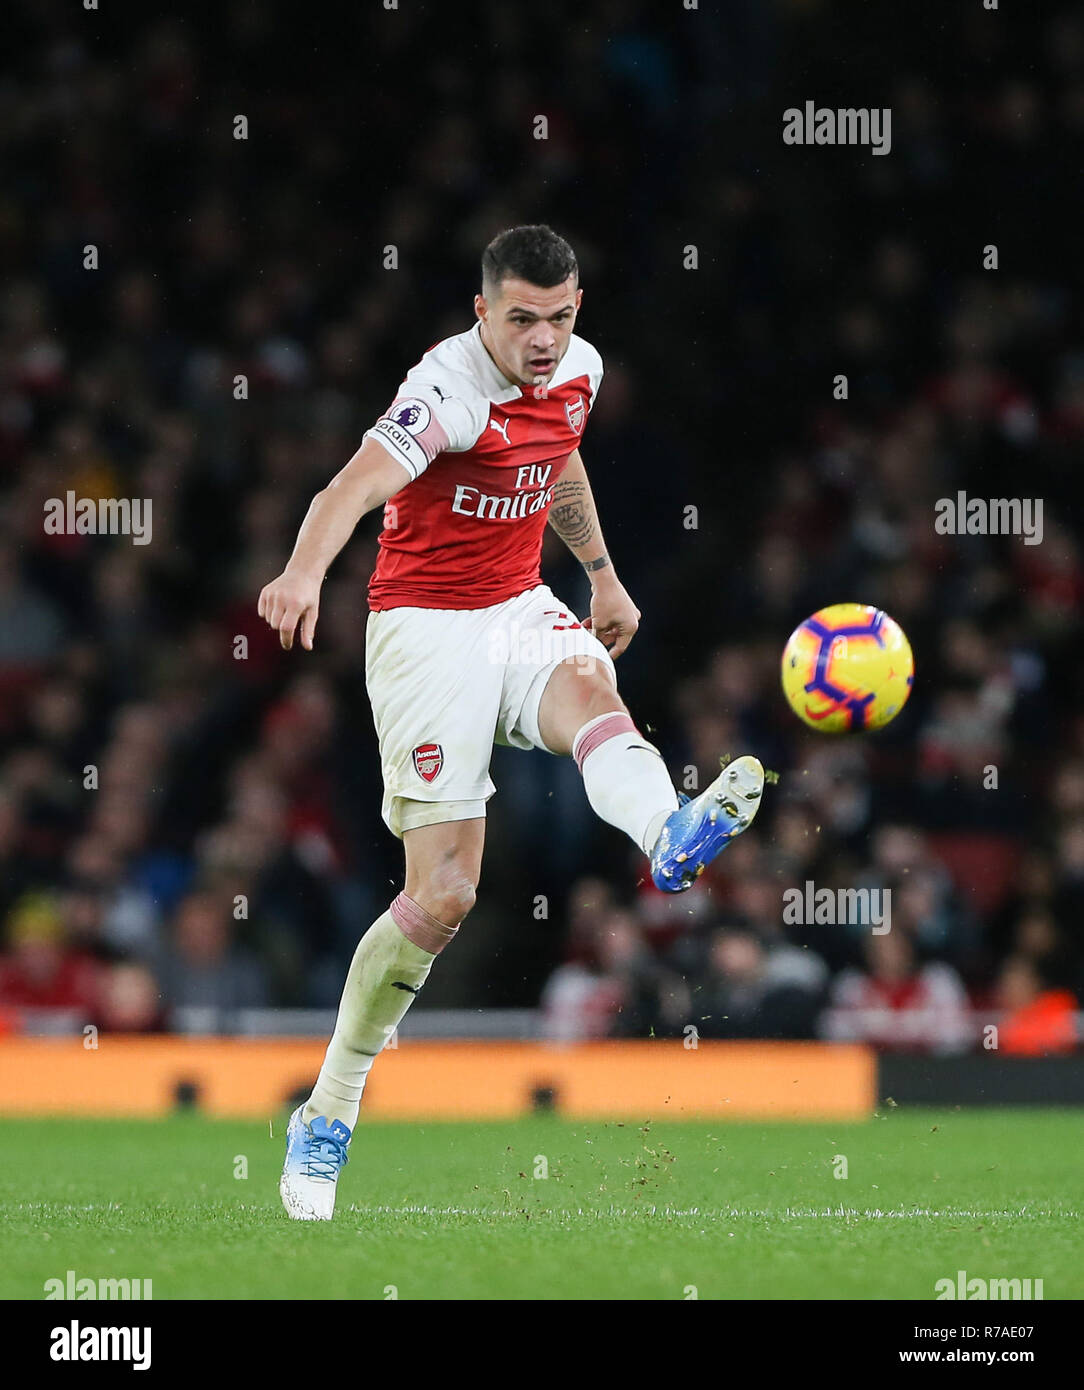 Granit Xhaka of Arsenal passes the ball during the Premier League match between Arsenal and Huddersfield Town at Emirates Stadium on December 8th 2018 in London, England. (Photo by Arron Gent/phcimages.com) Stock Photo